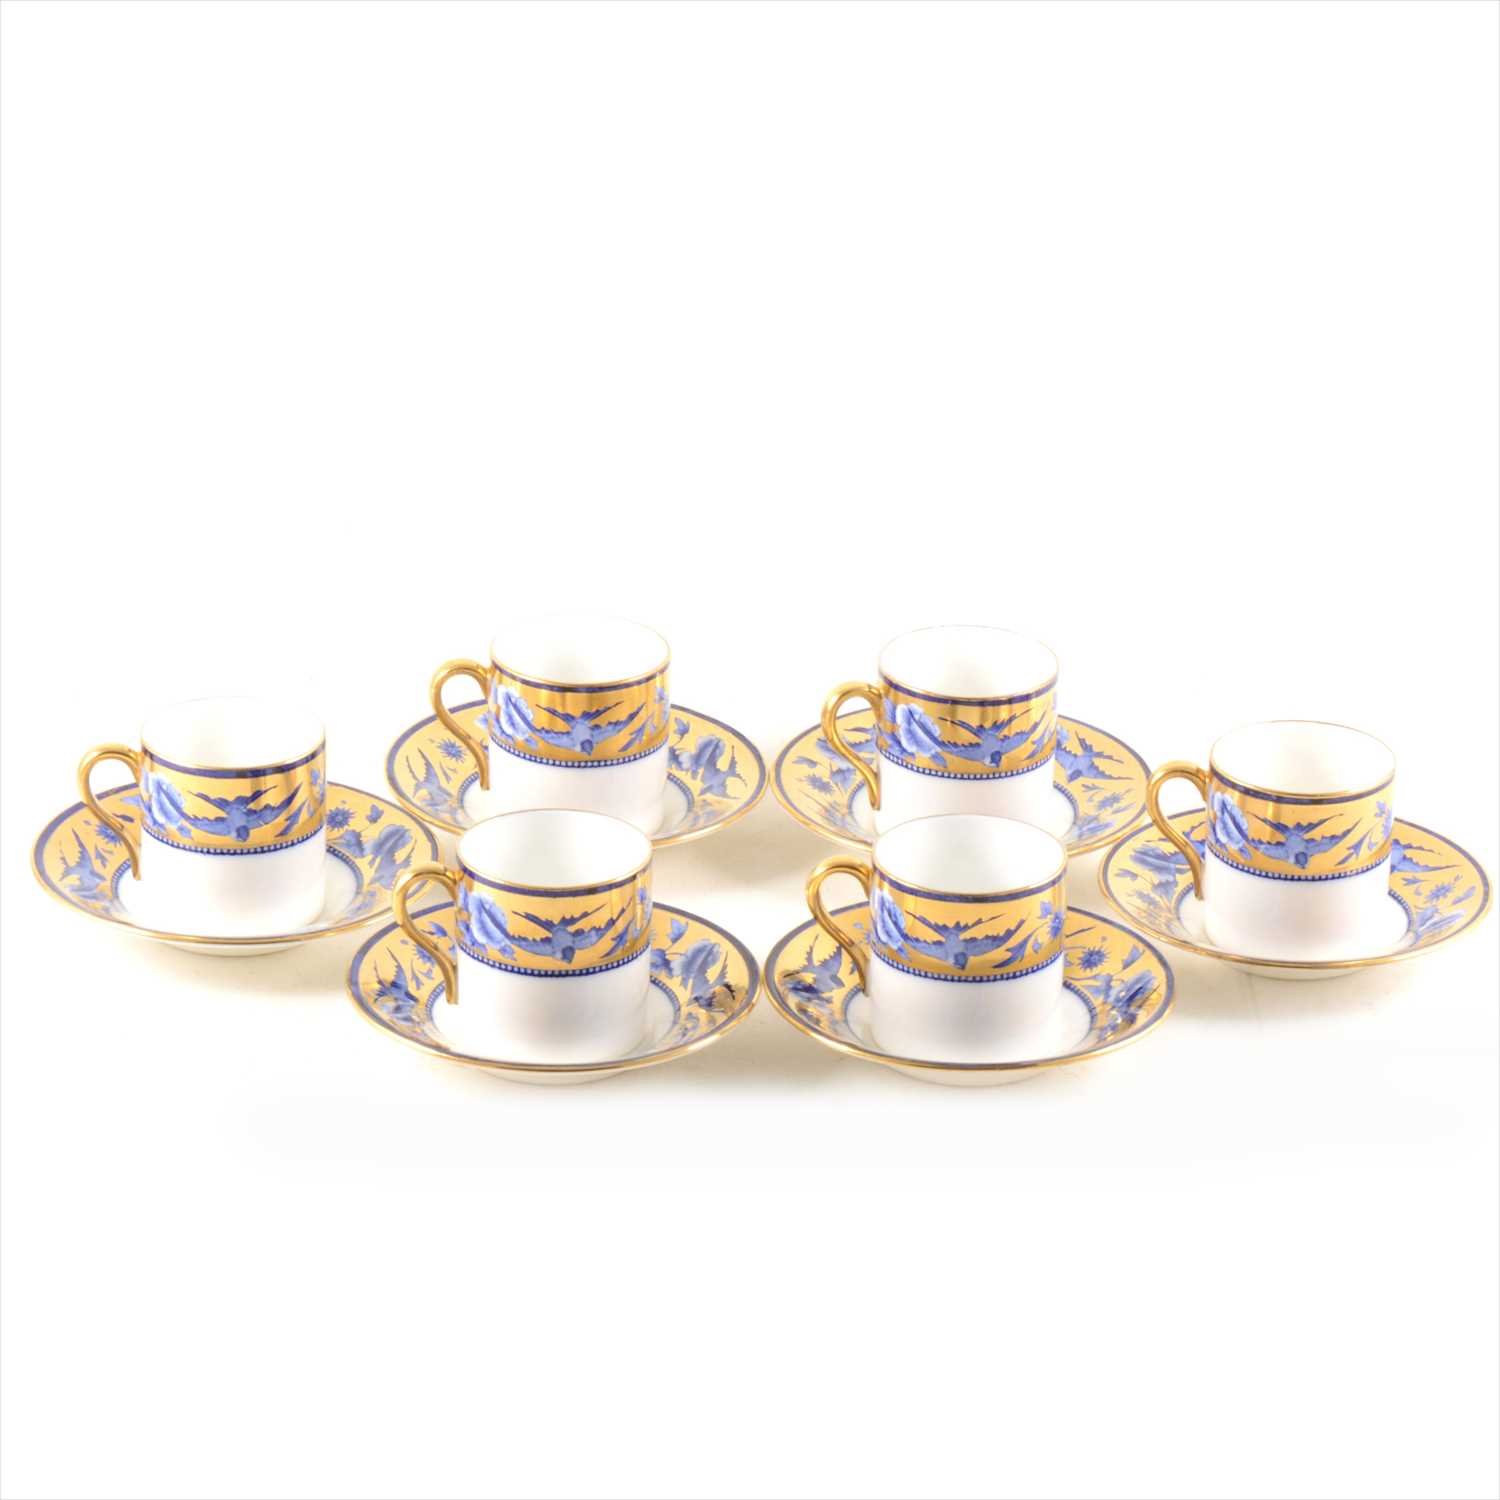 Lot 82 - A set of six Shelley bone china coffee cans and saucers, 'Blue Swallows' pattern